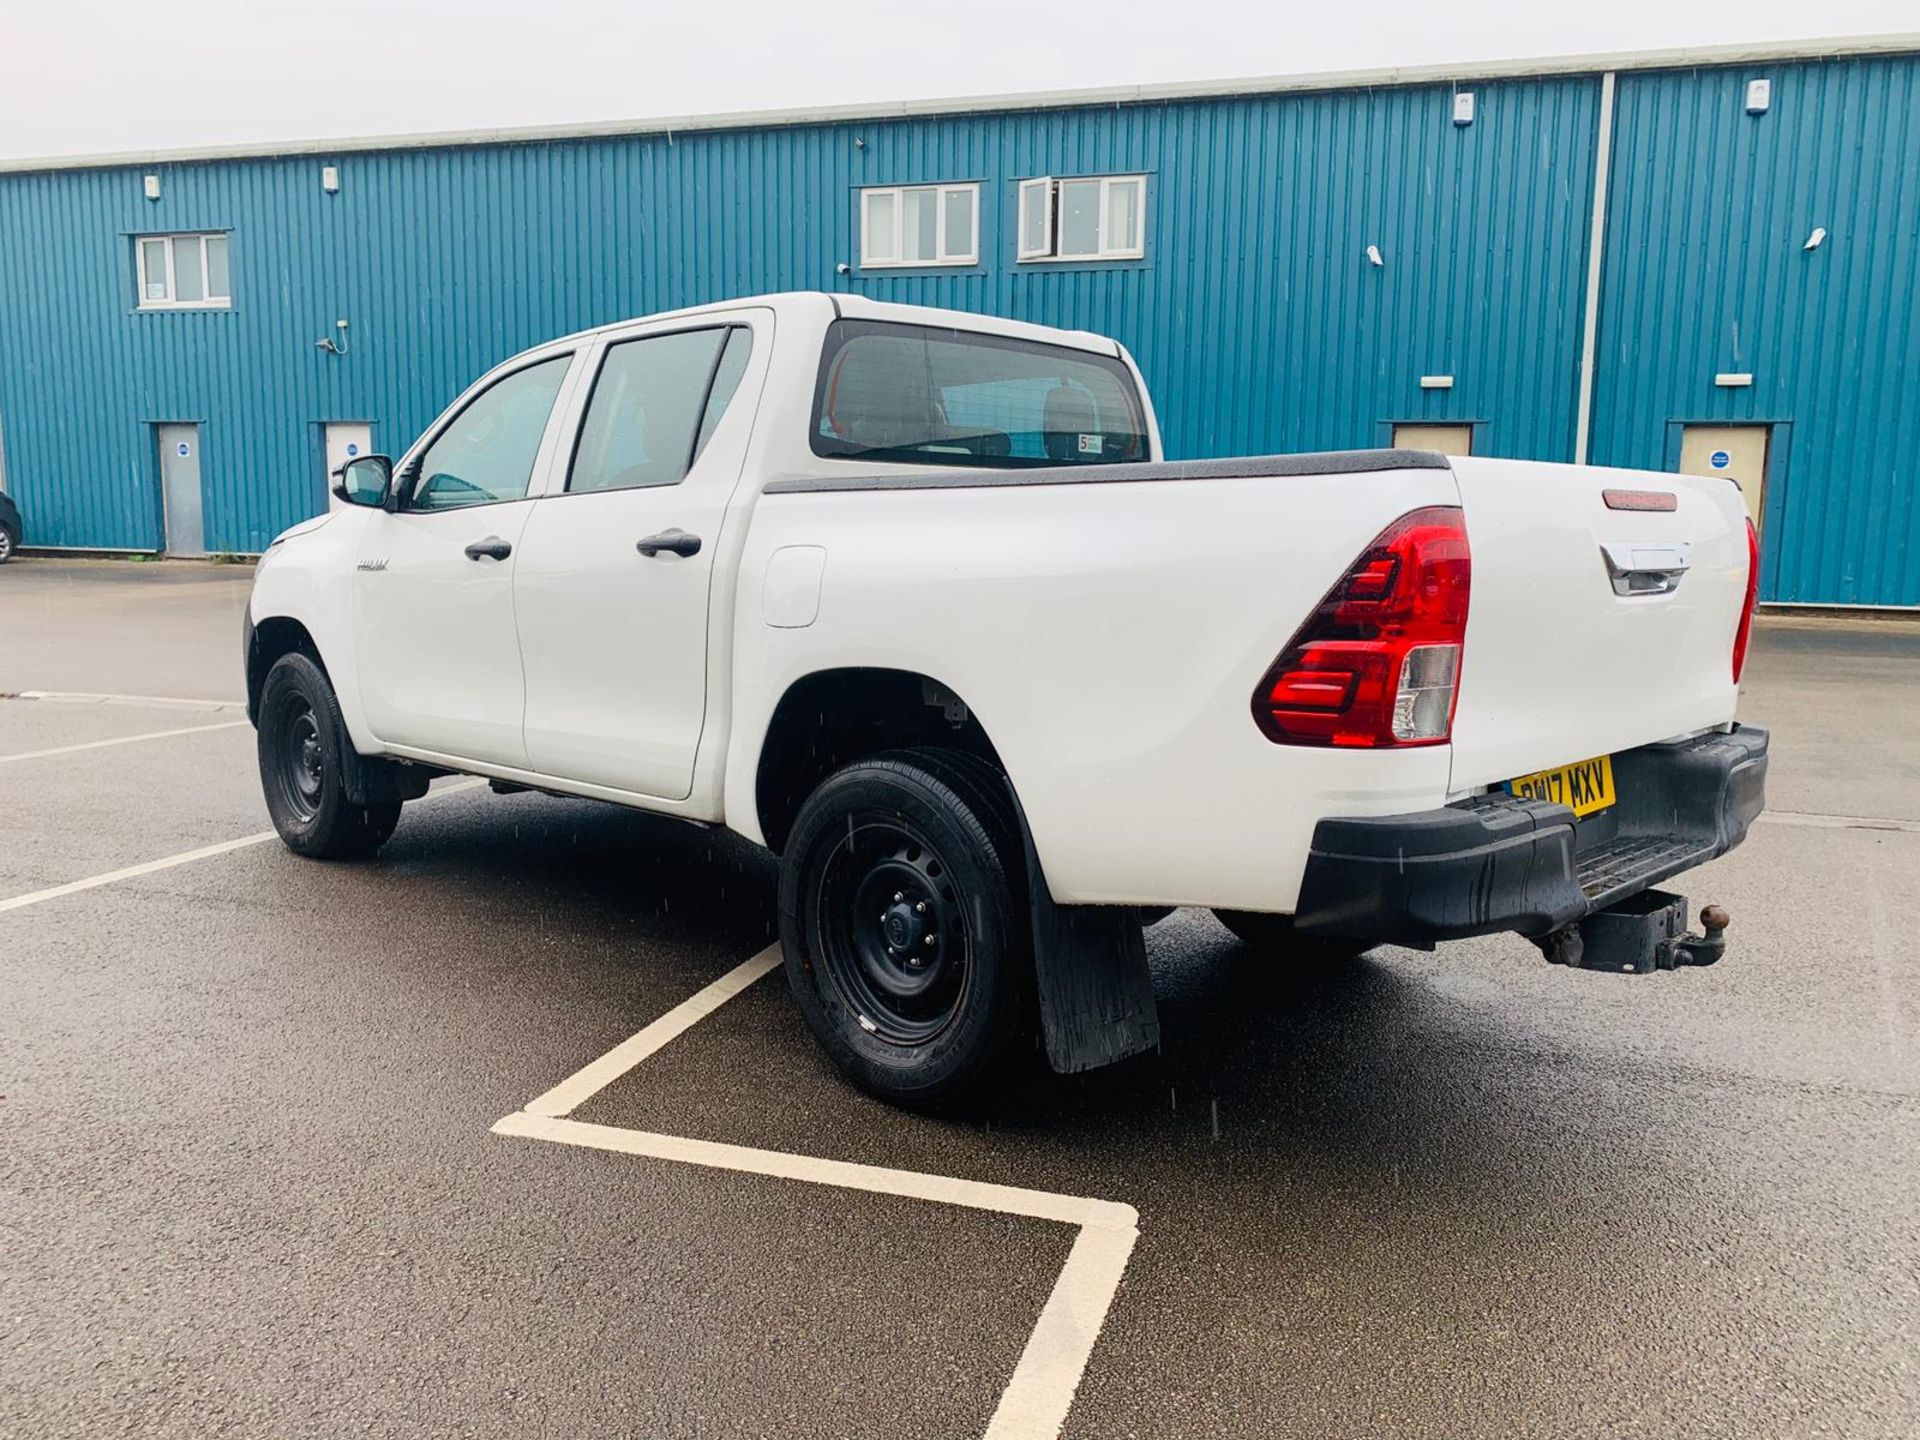 Toyota Hilux 2.4 D-4D Active 4WD Double Cab Pick Up - 2017 17 Reg - Air Con - Euro 6b - Tow Pack - Image 7 of 31